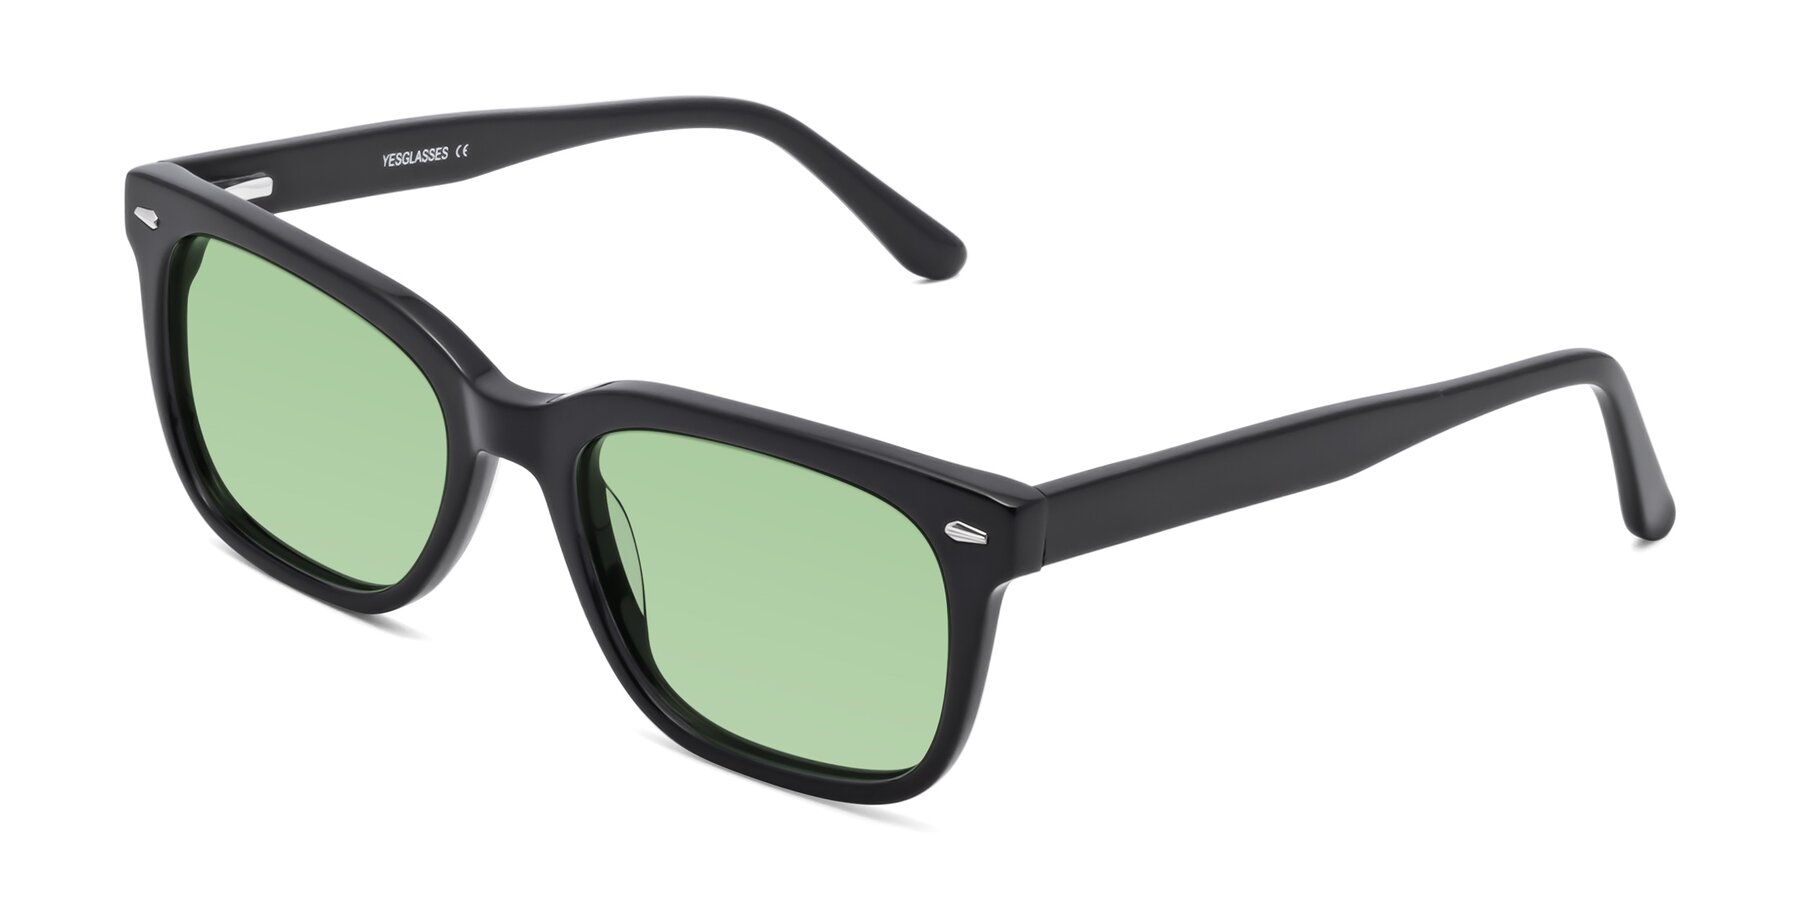 Angle of 1052 in Black with Medium Green Tinted Lenses